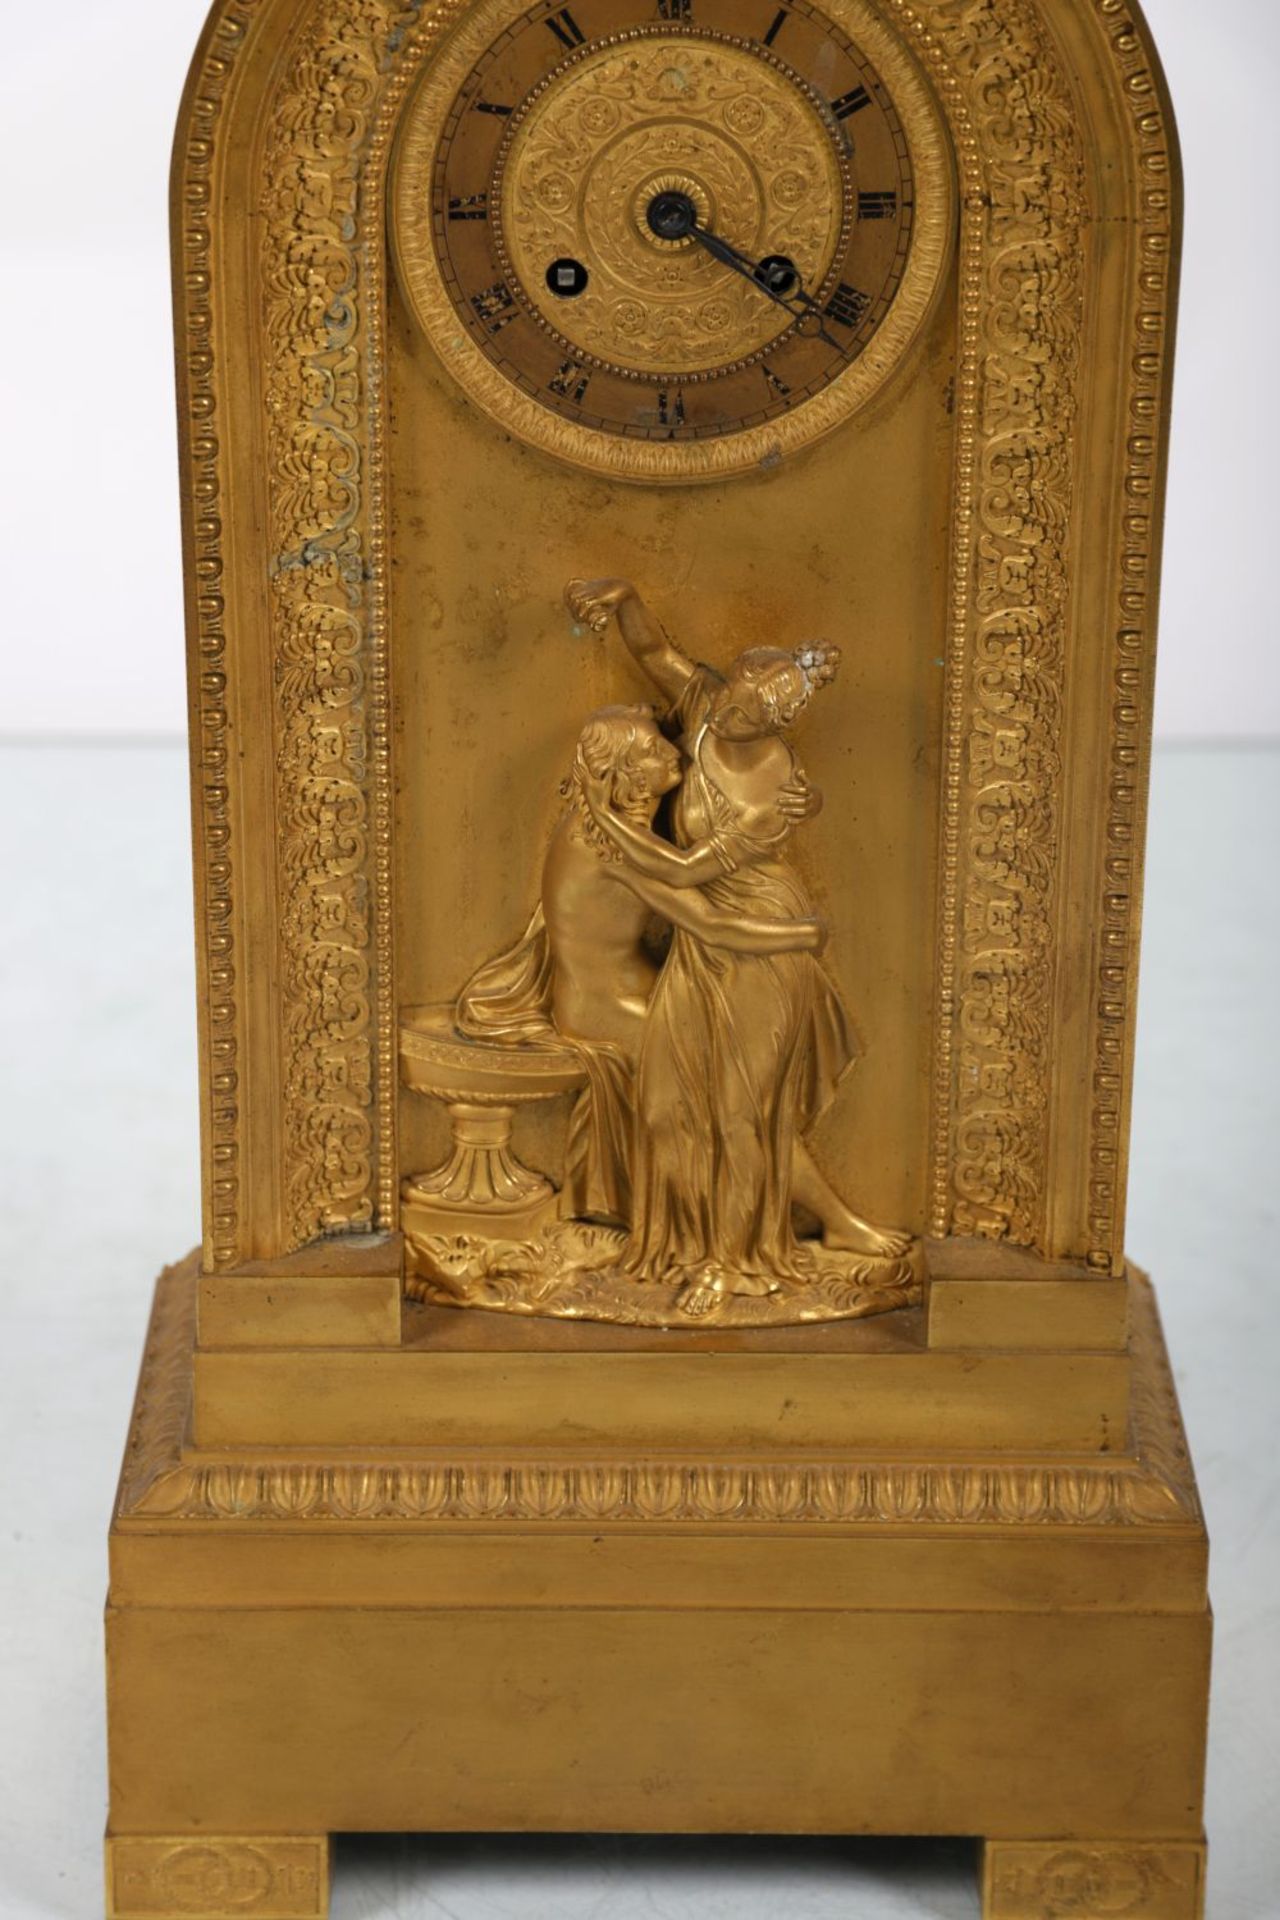 19TH-CENTURY FRENCH EMPIRE MANTLE CLOCK - Image 3 of 3